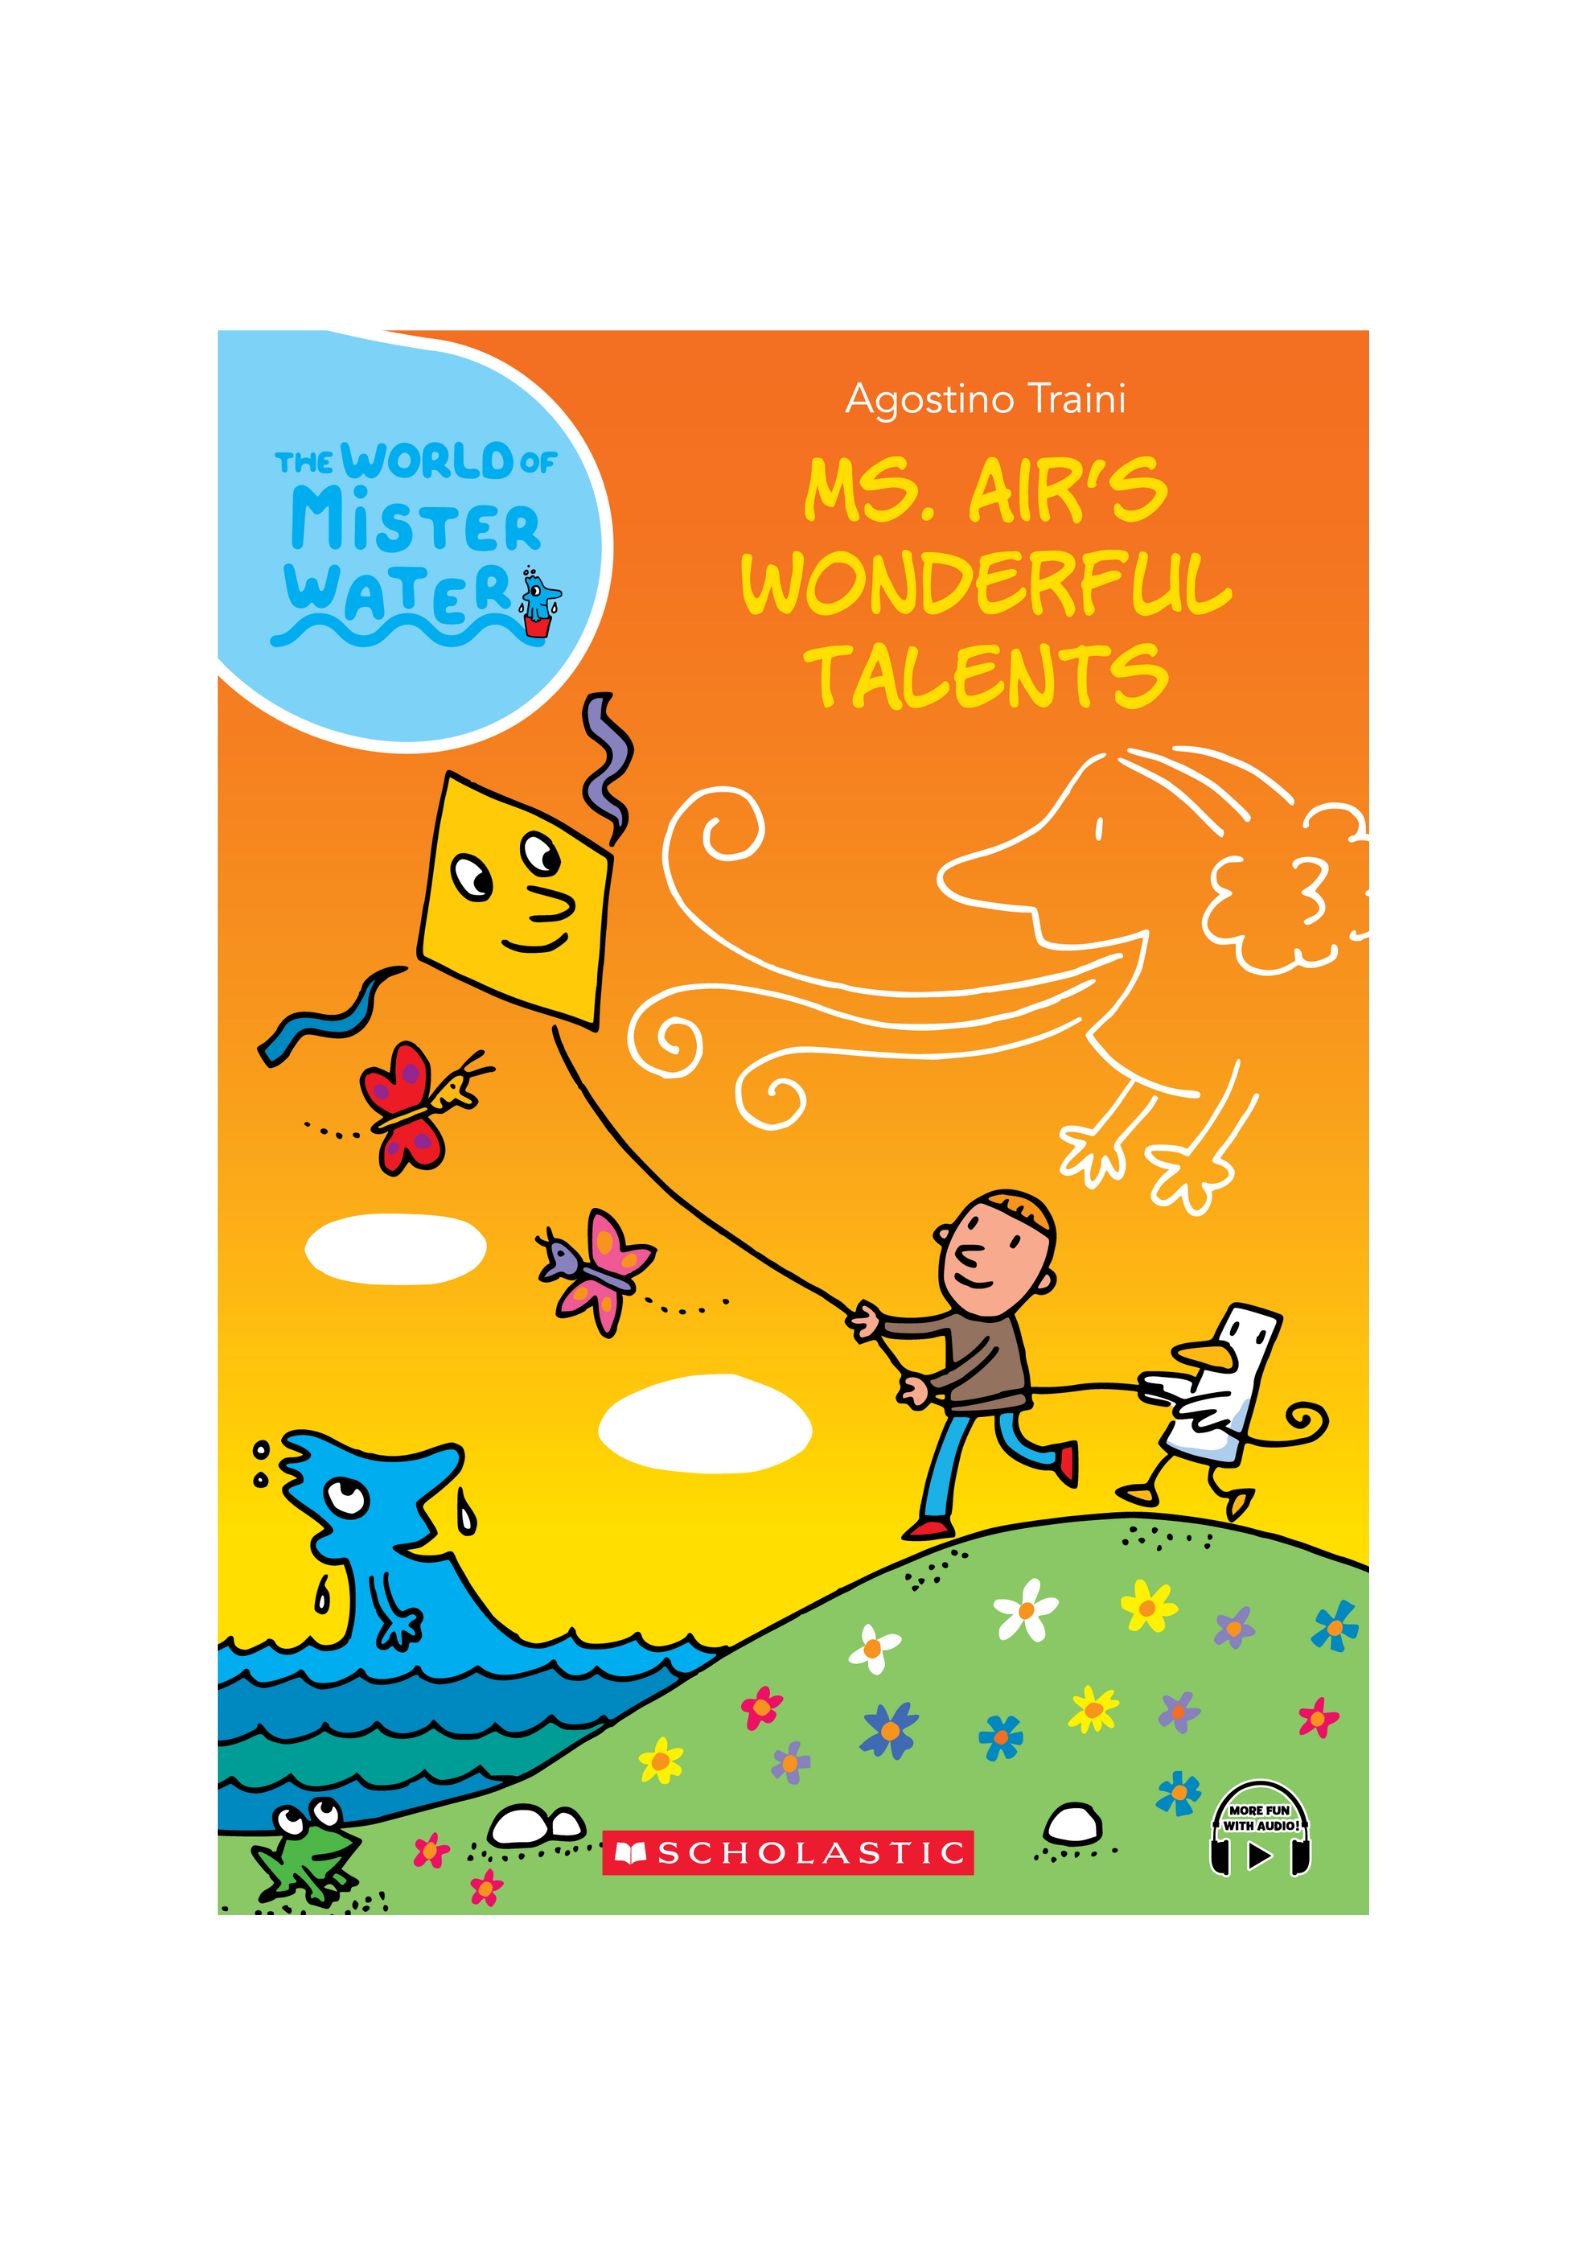 The World of Mister Water #2: Ms. Air’s Wonderful Talents